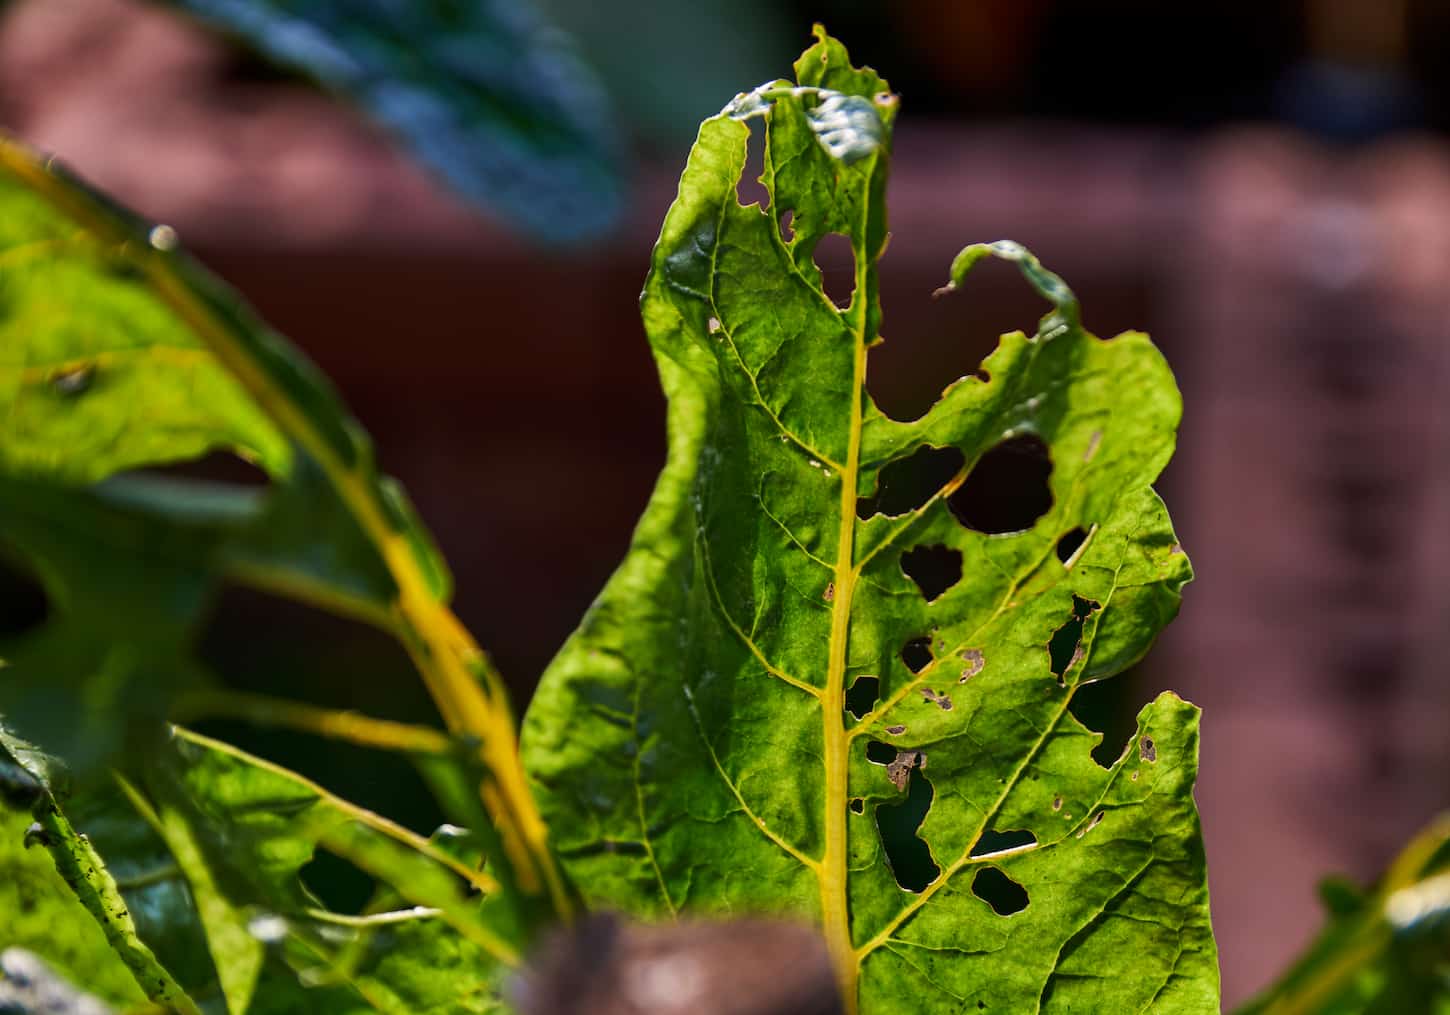 An image of many bite marks of pests on the vegetable leaves.